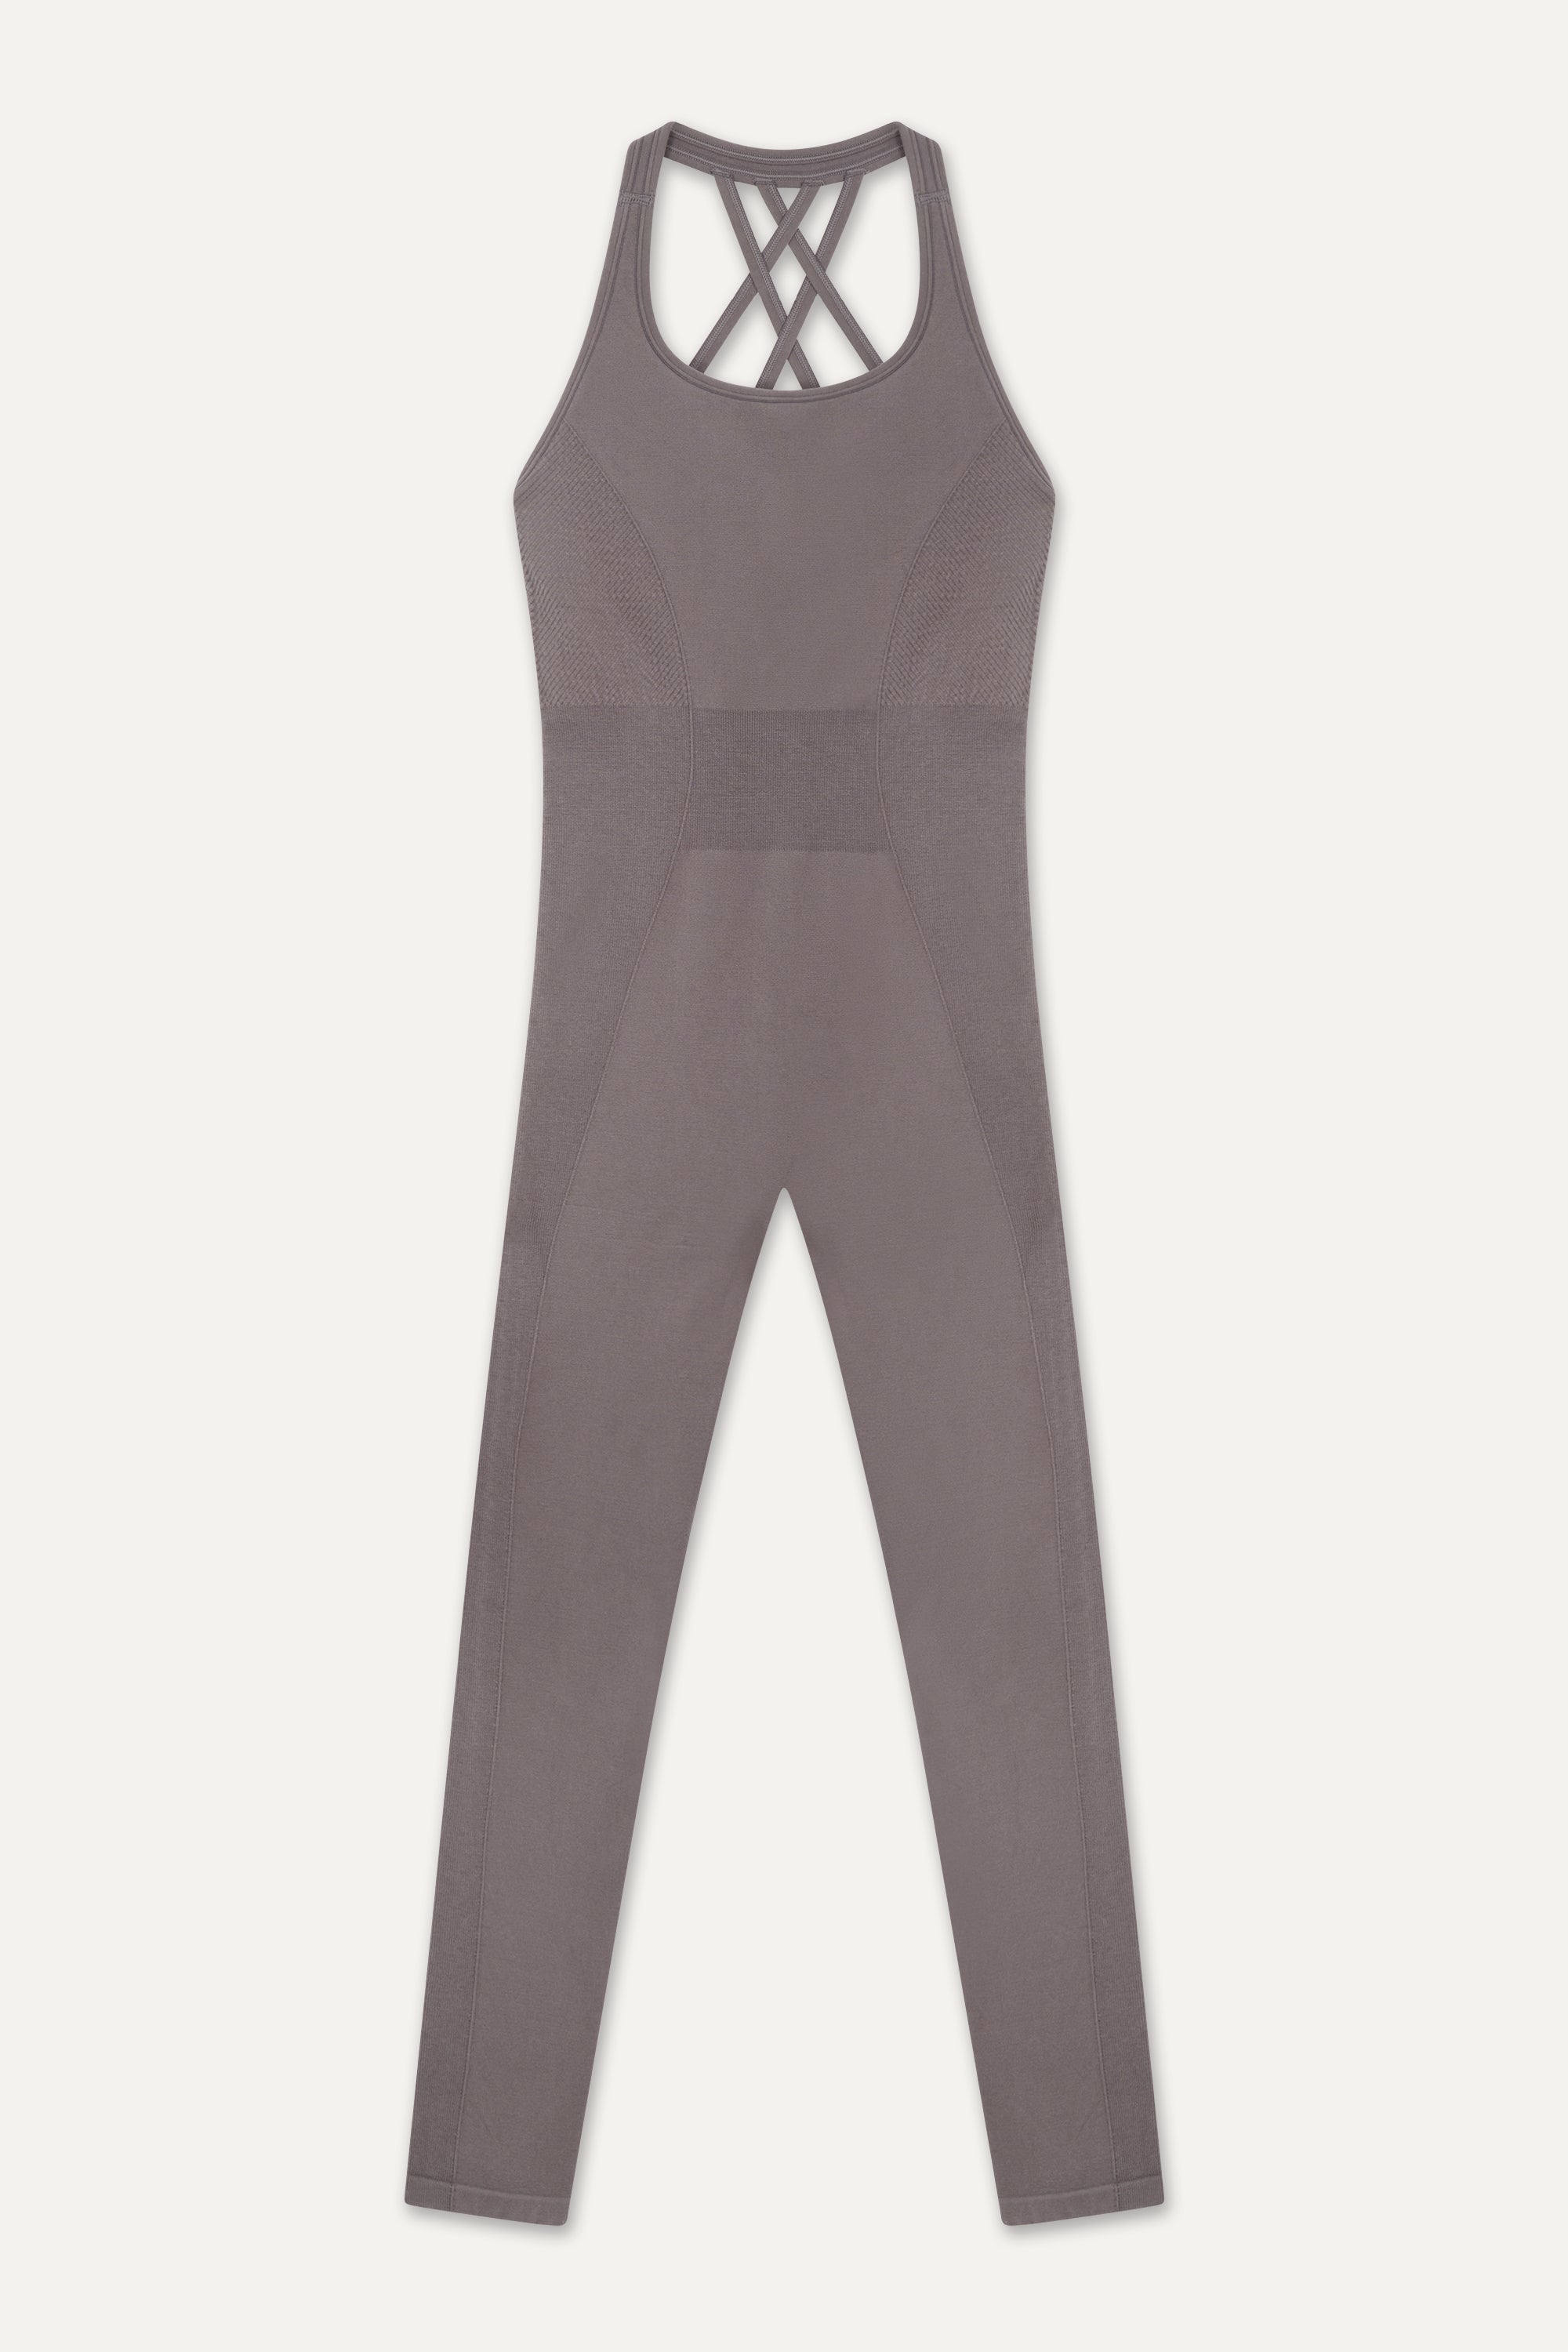 Twilight ash light brown purple seamless sculpting shaping one piece bodysuit with built in shelf bra and removable pads for yoga, pilates, gym and exercise by sustainable activewear brand Jilla Active